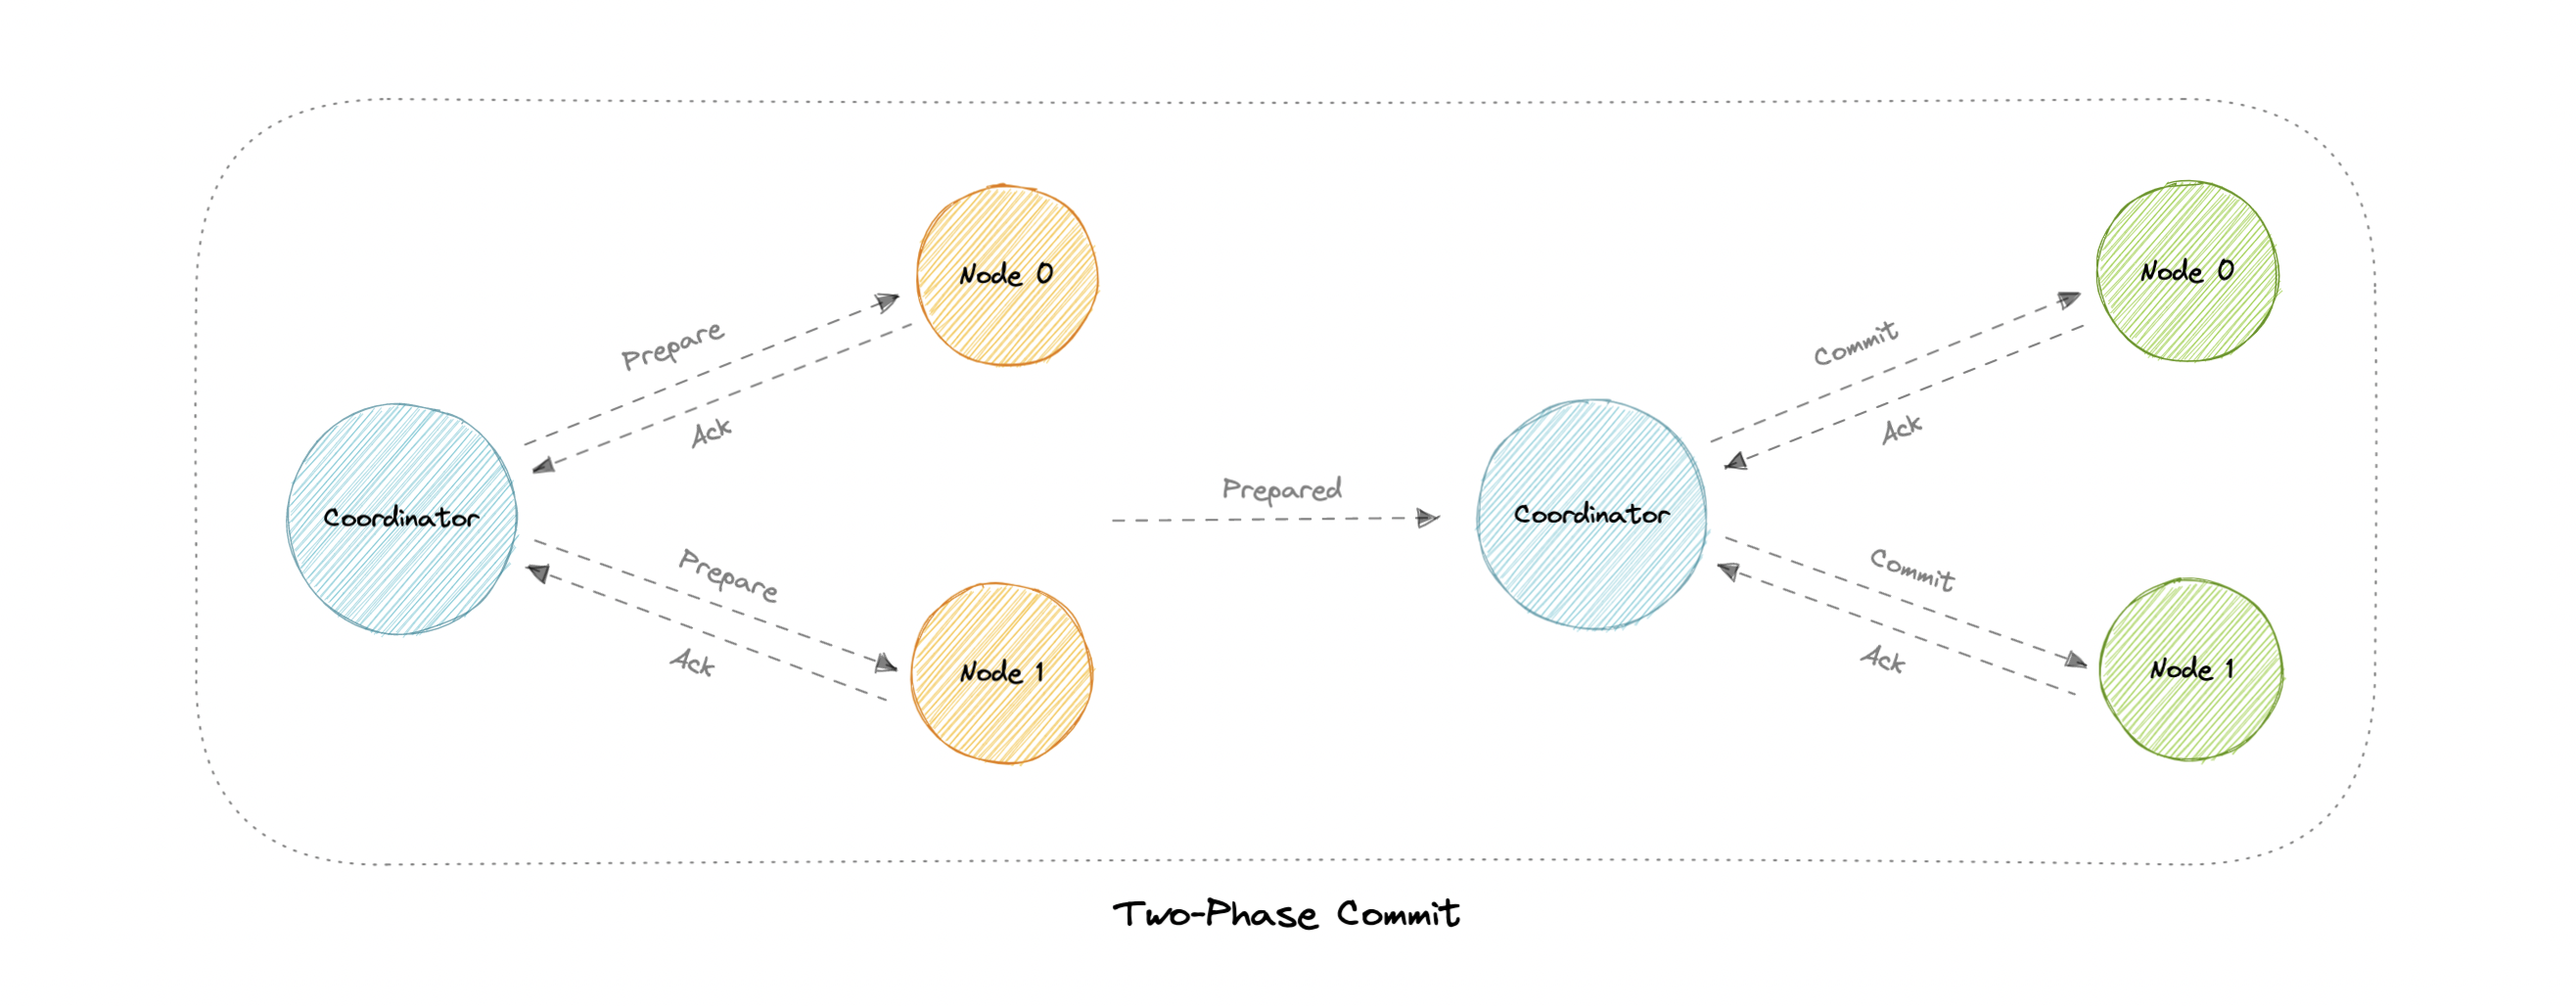 two-phase-commit